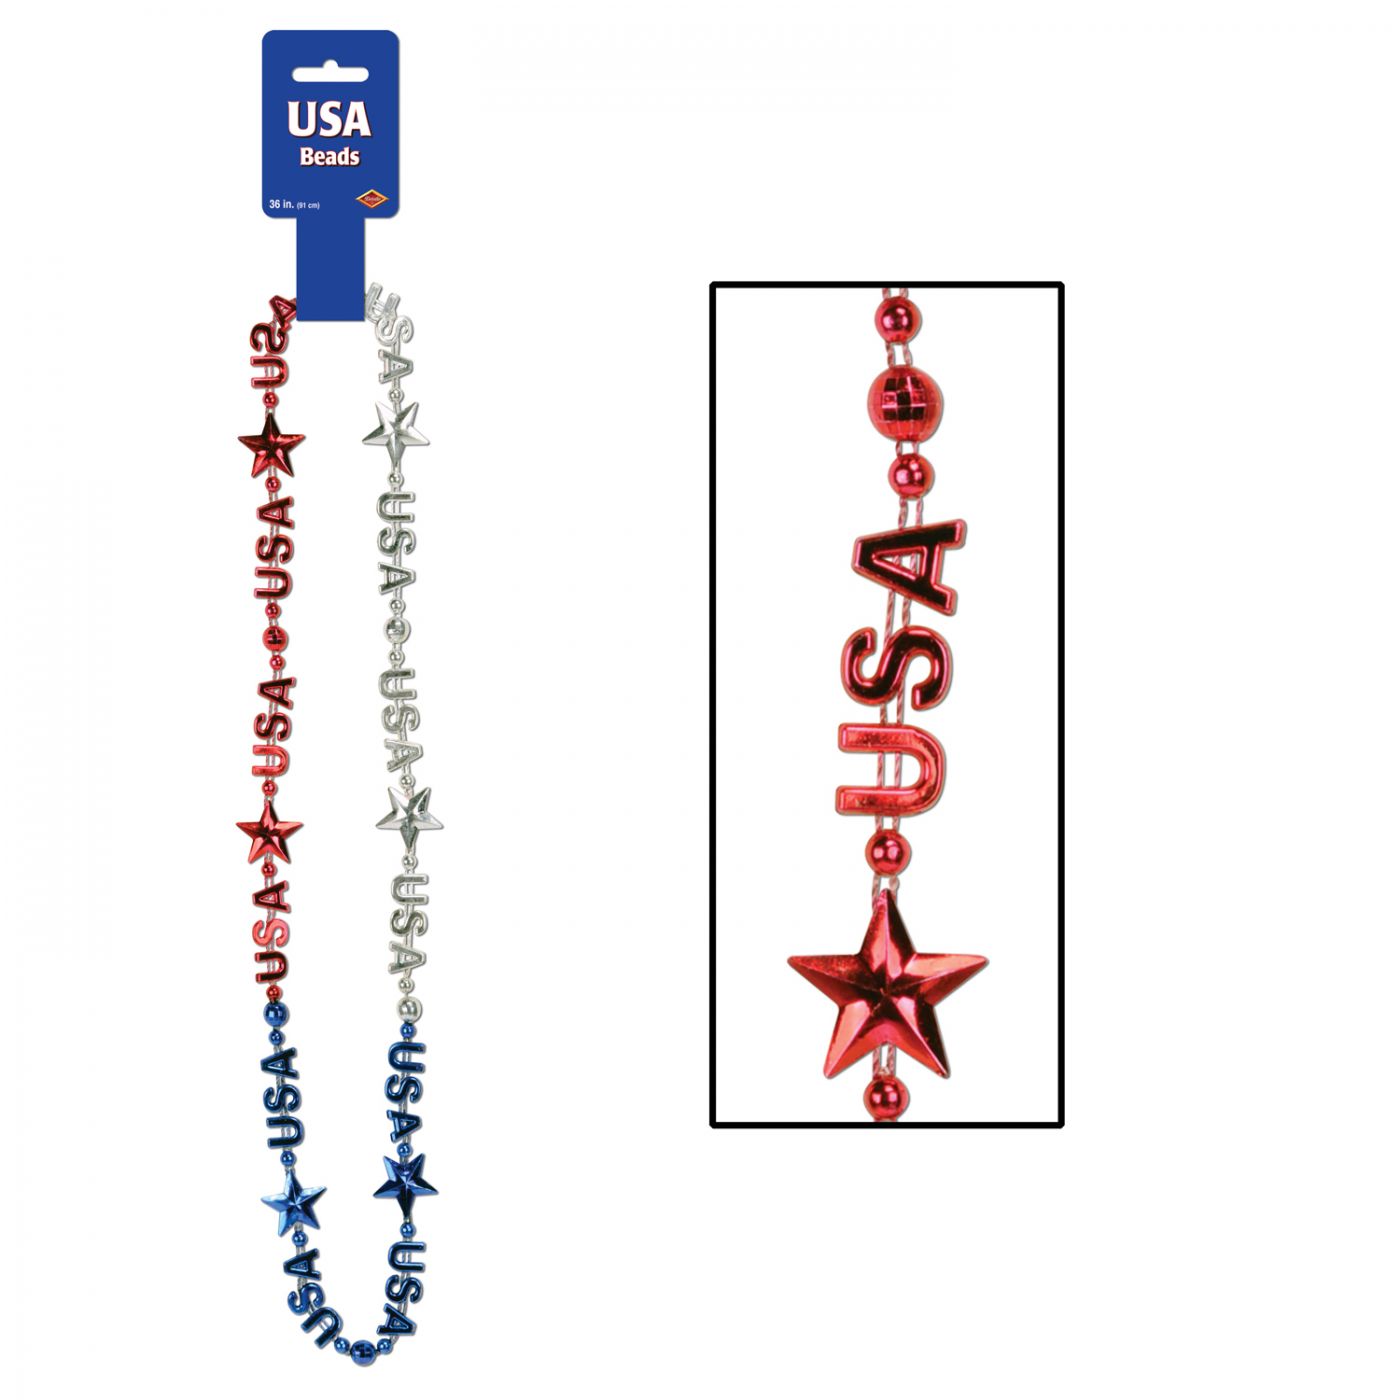 USA Beads-Of-Expression (12) image